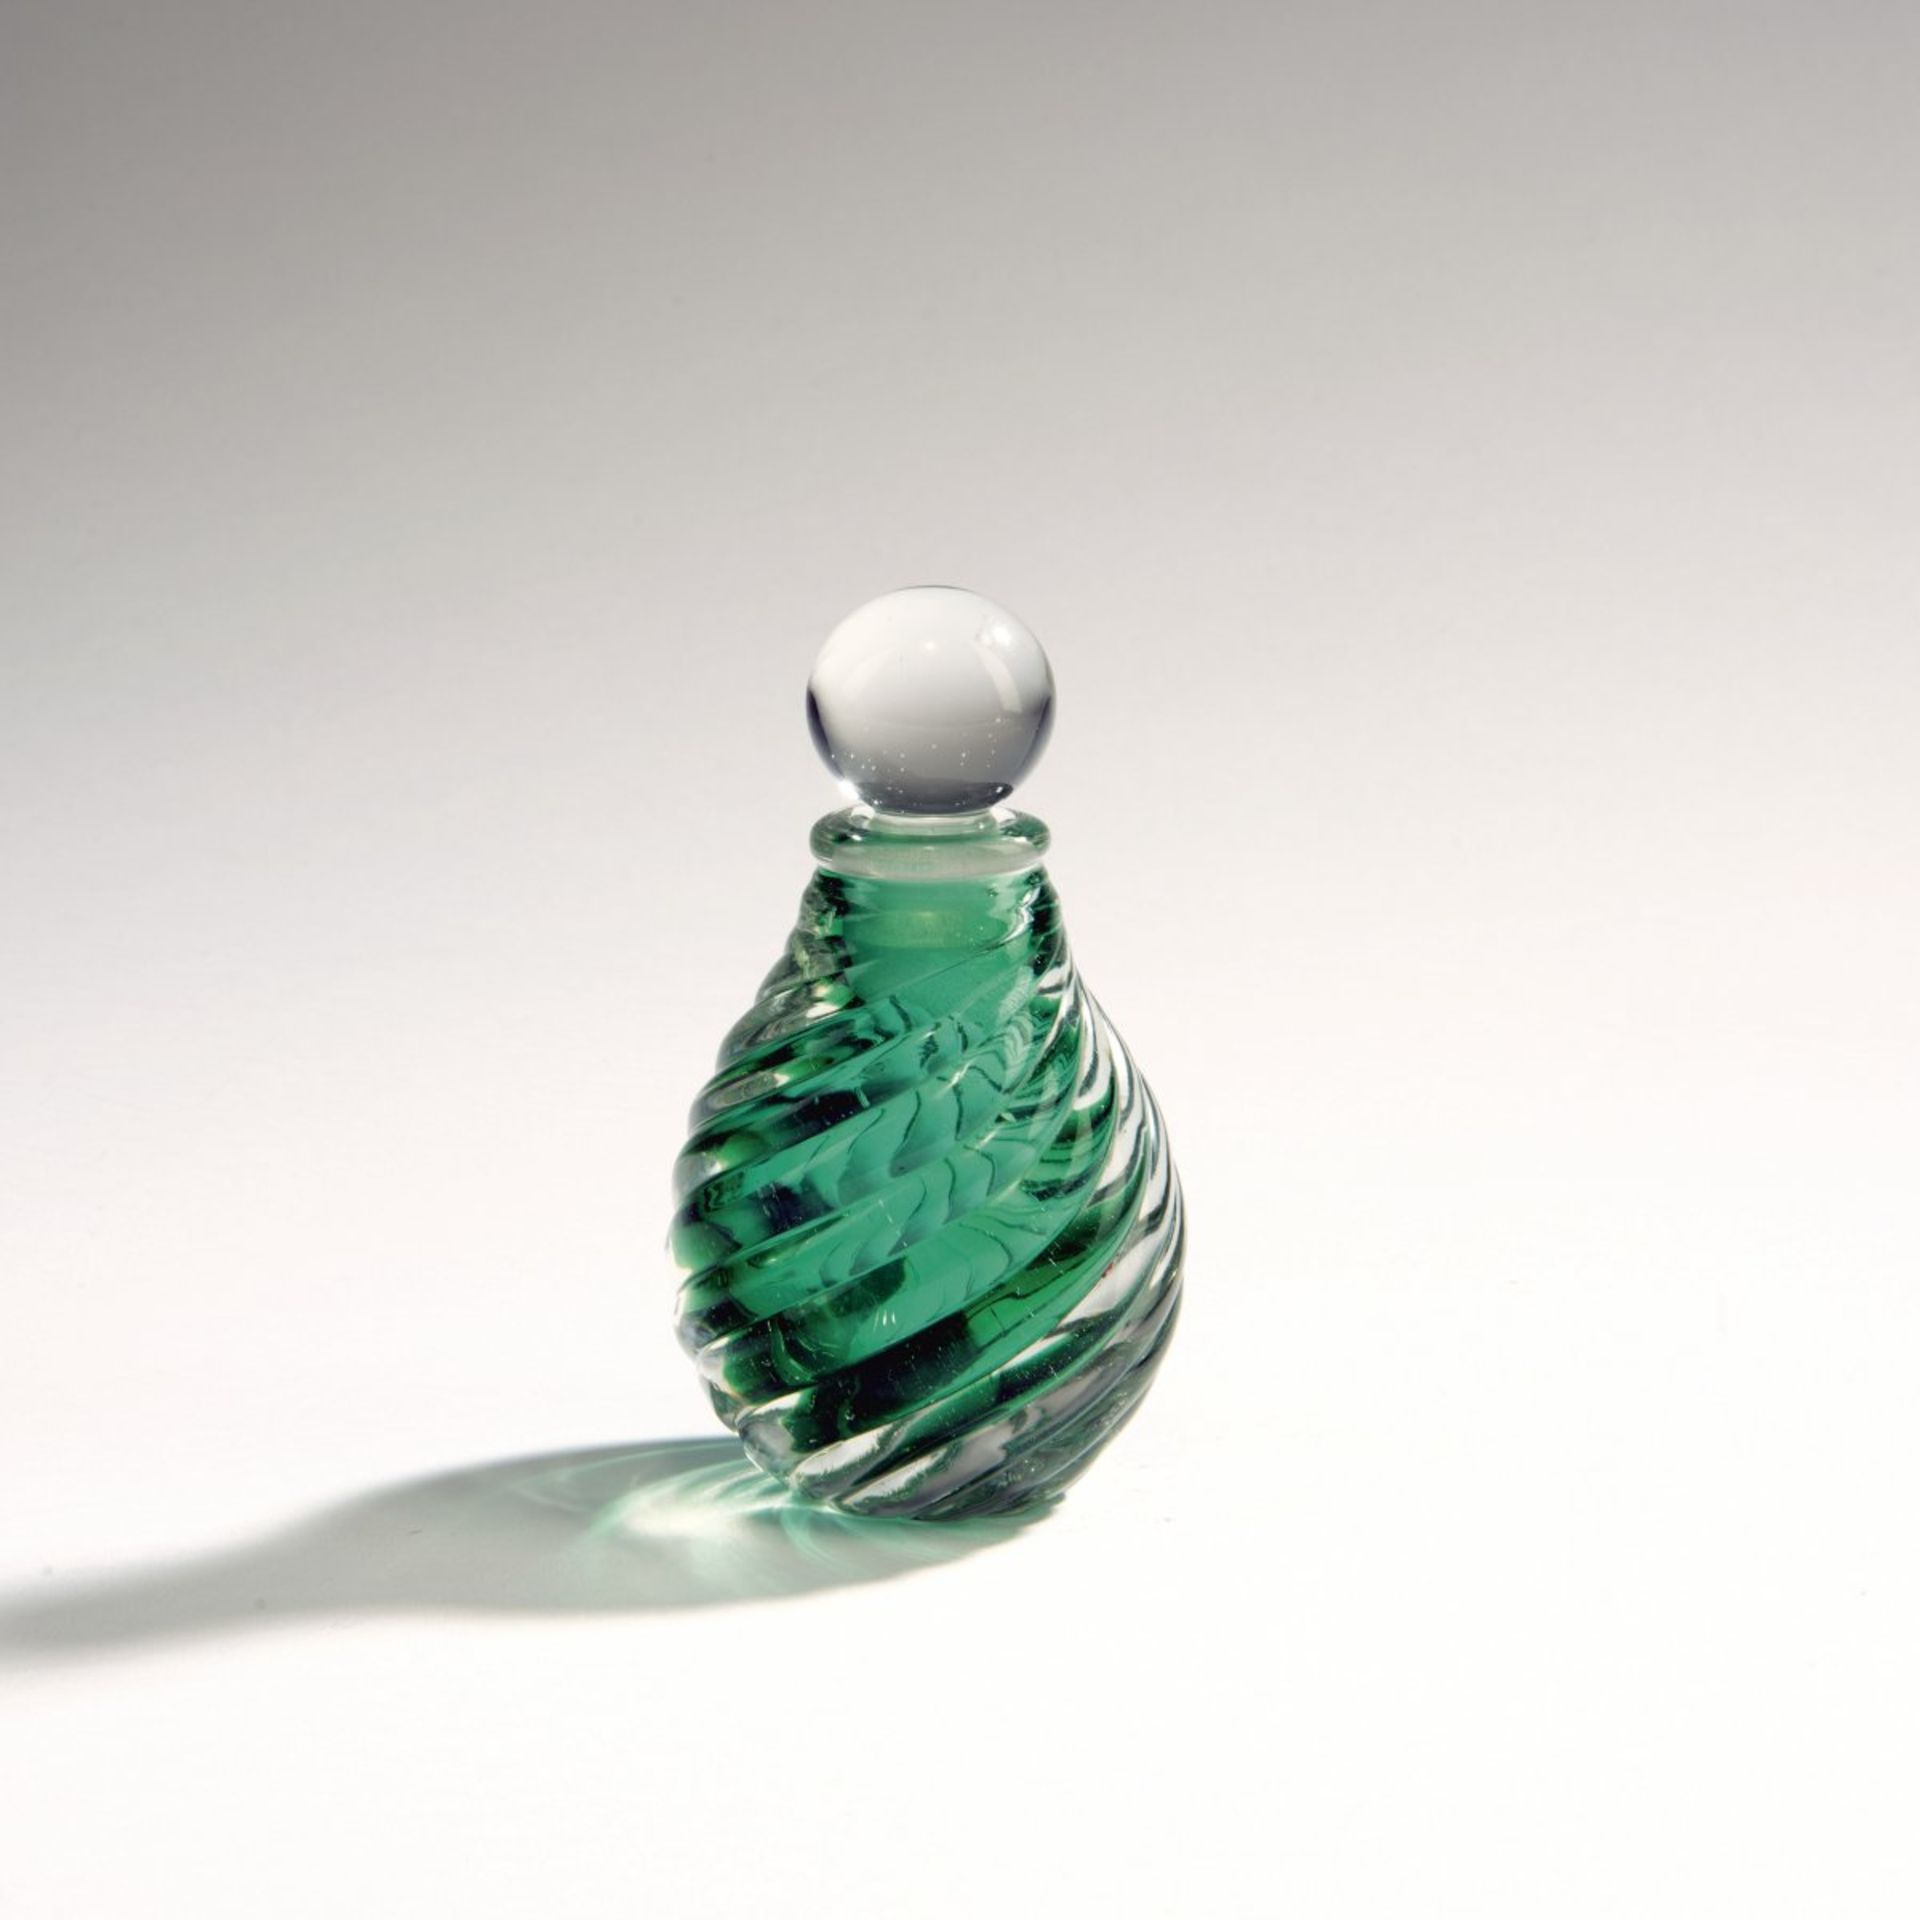 Carlo Scarpa, Bottle with stopper, c. 1935